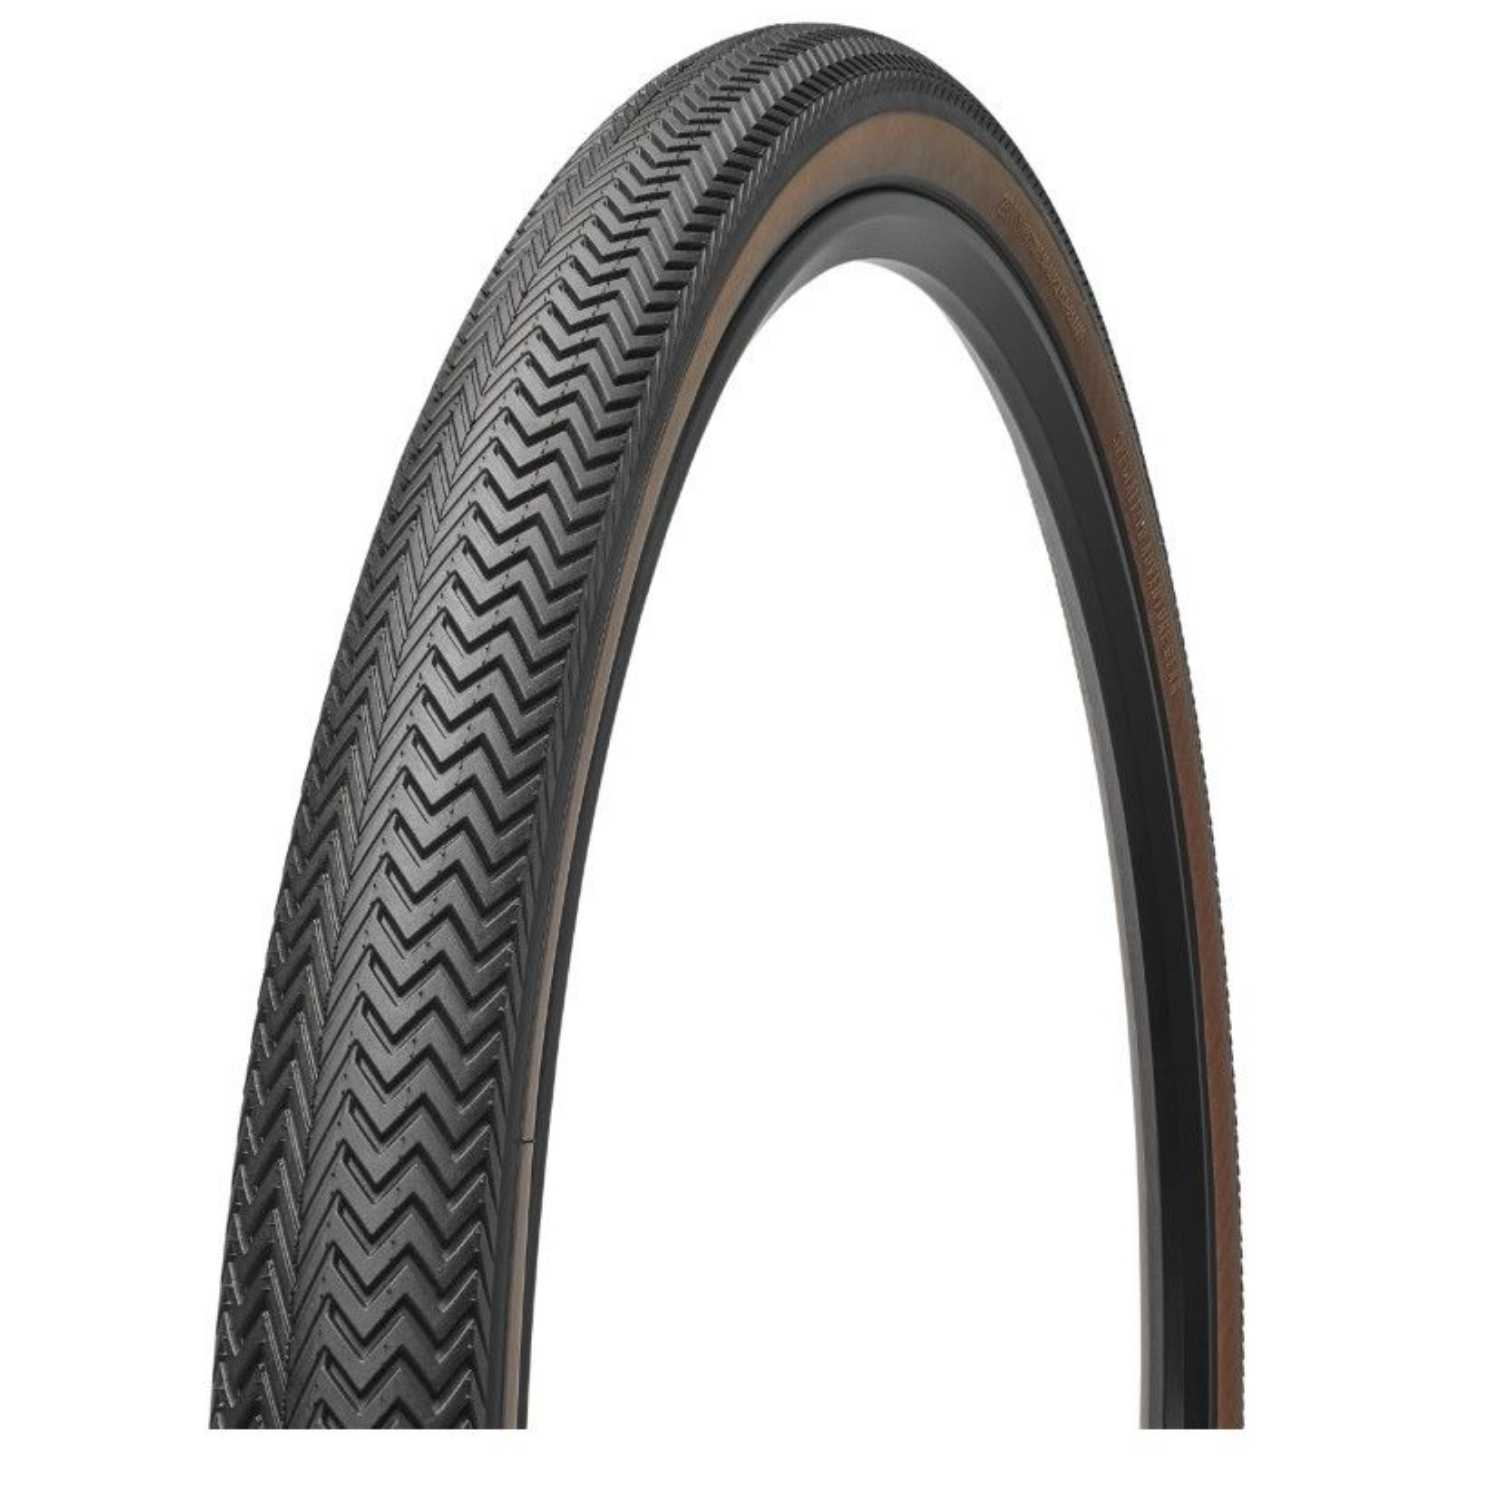 SPECIALIZED SAWTOOTH 2BLISS READY TAN SIDE WALL TIRE